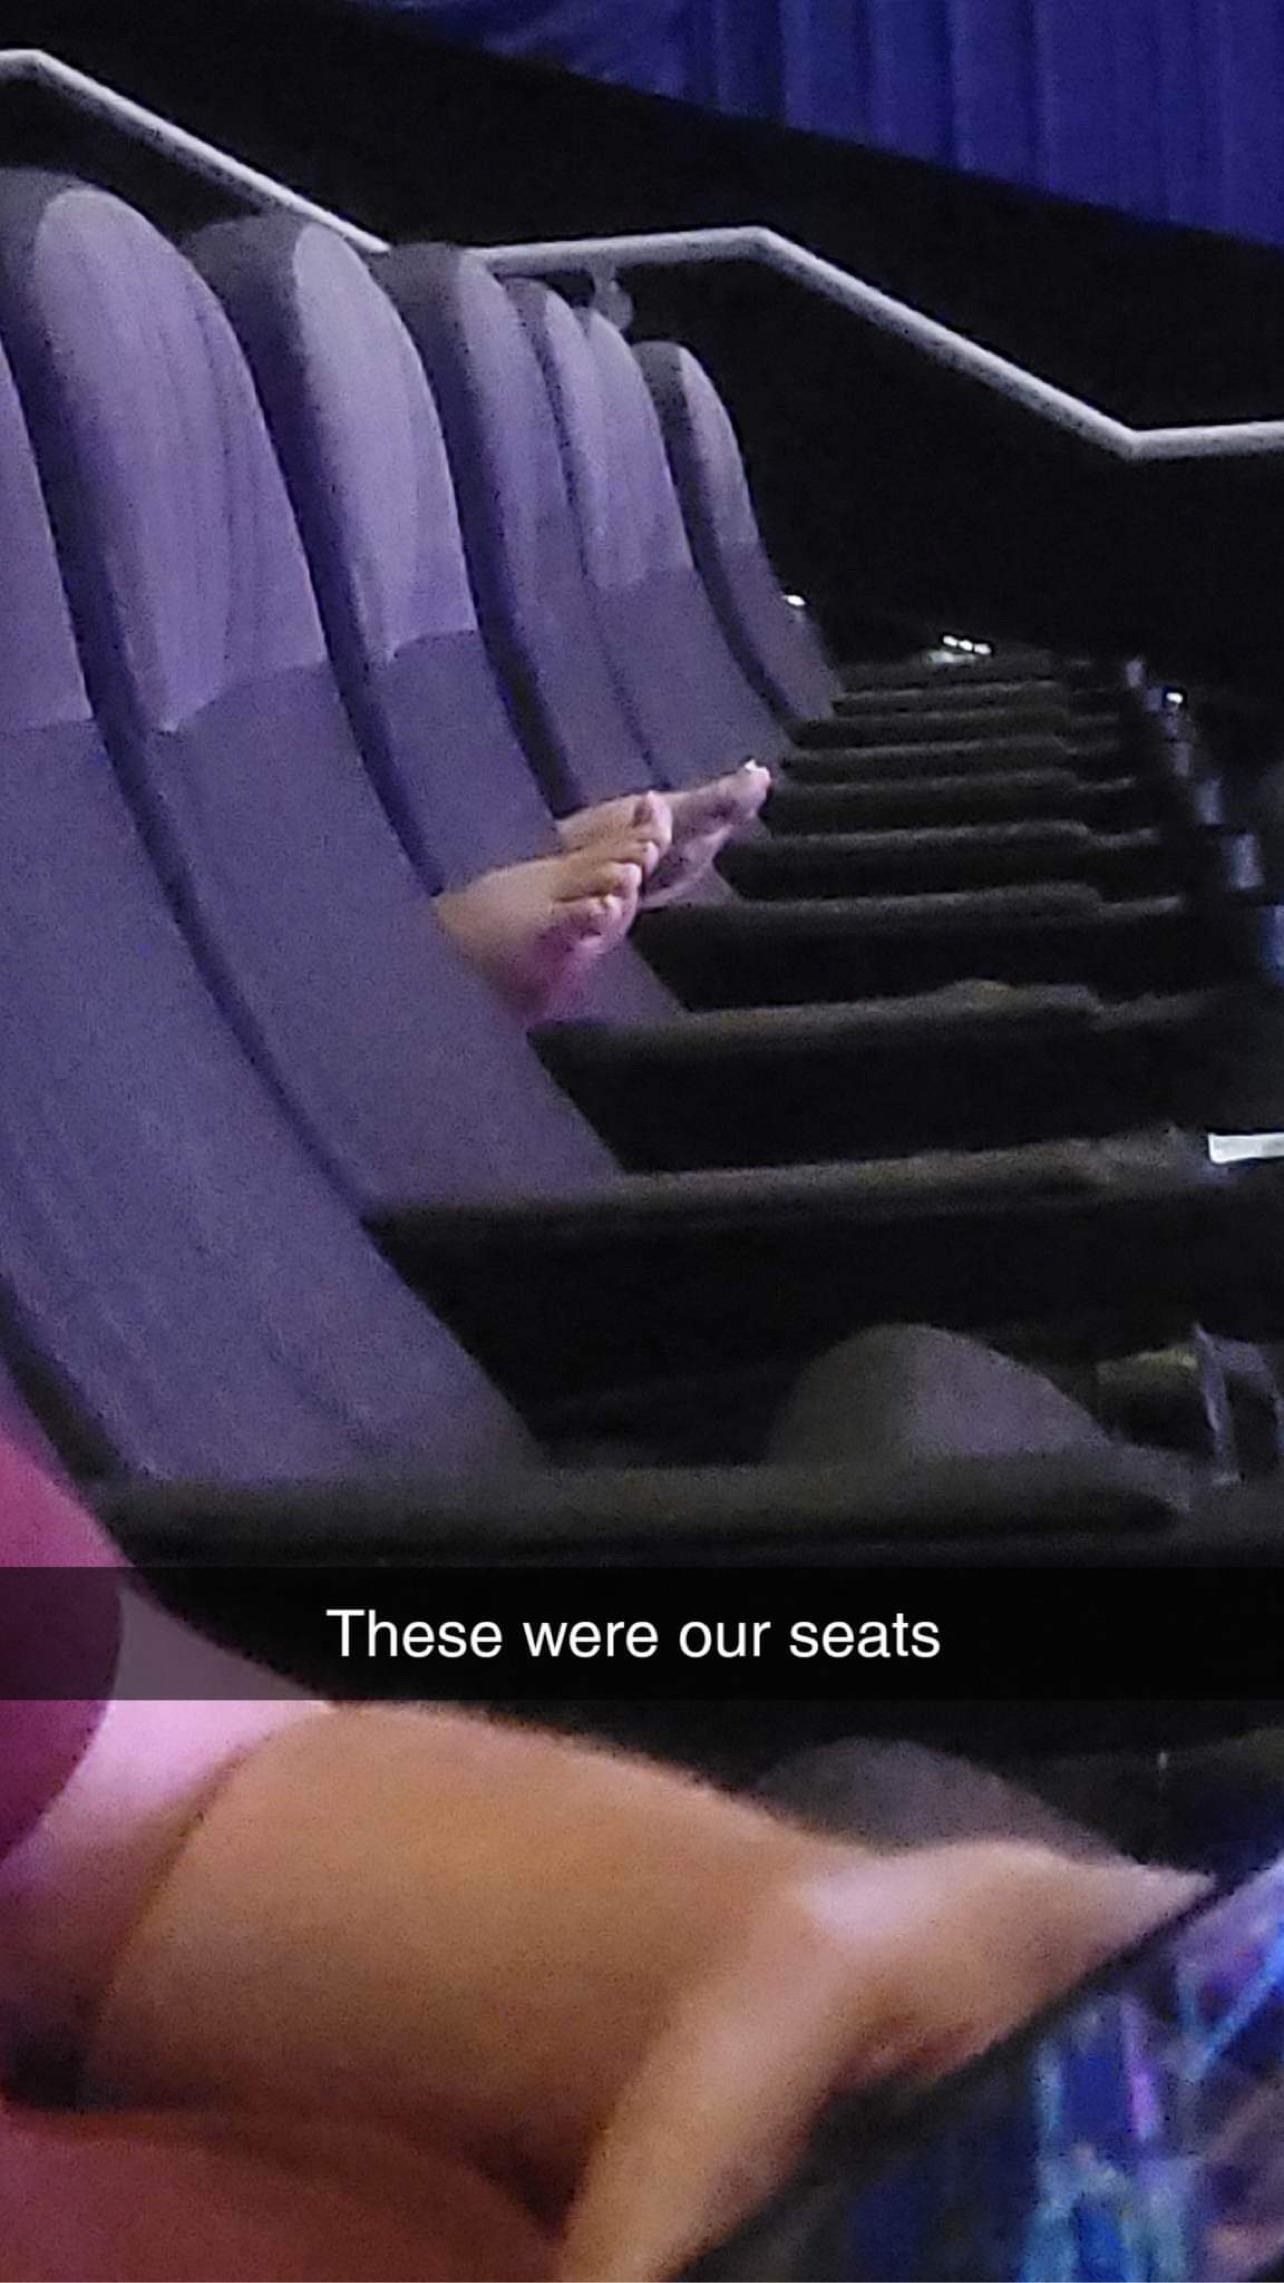 Two feet resting on the arms of a theater seat